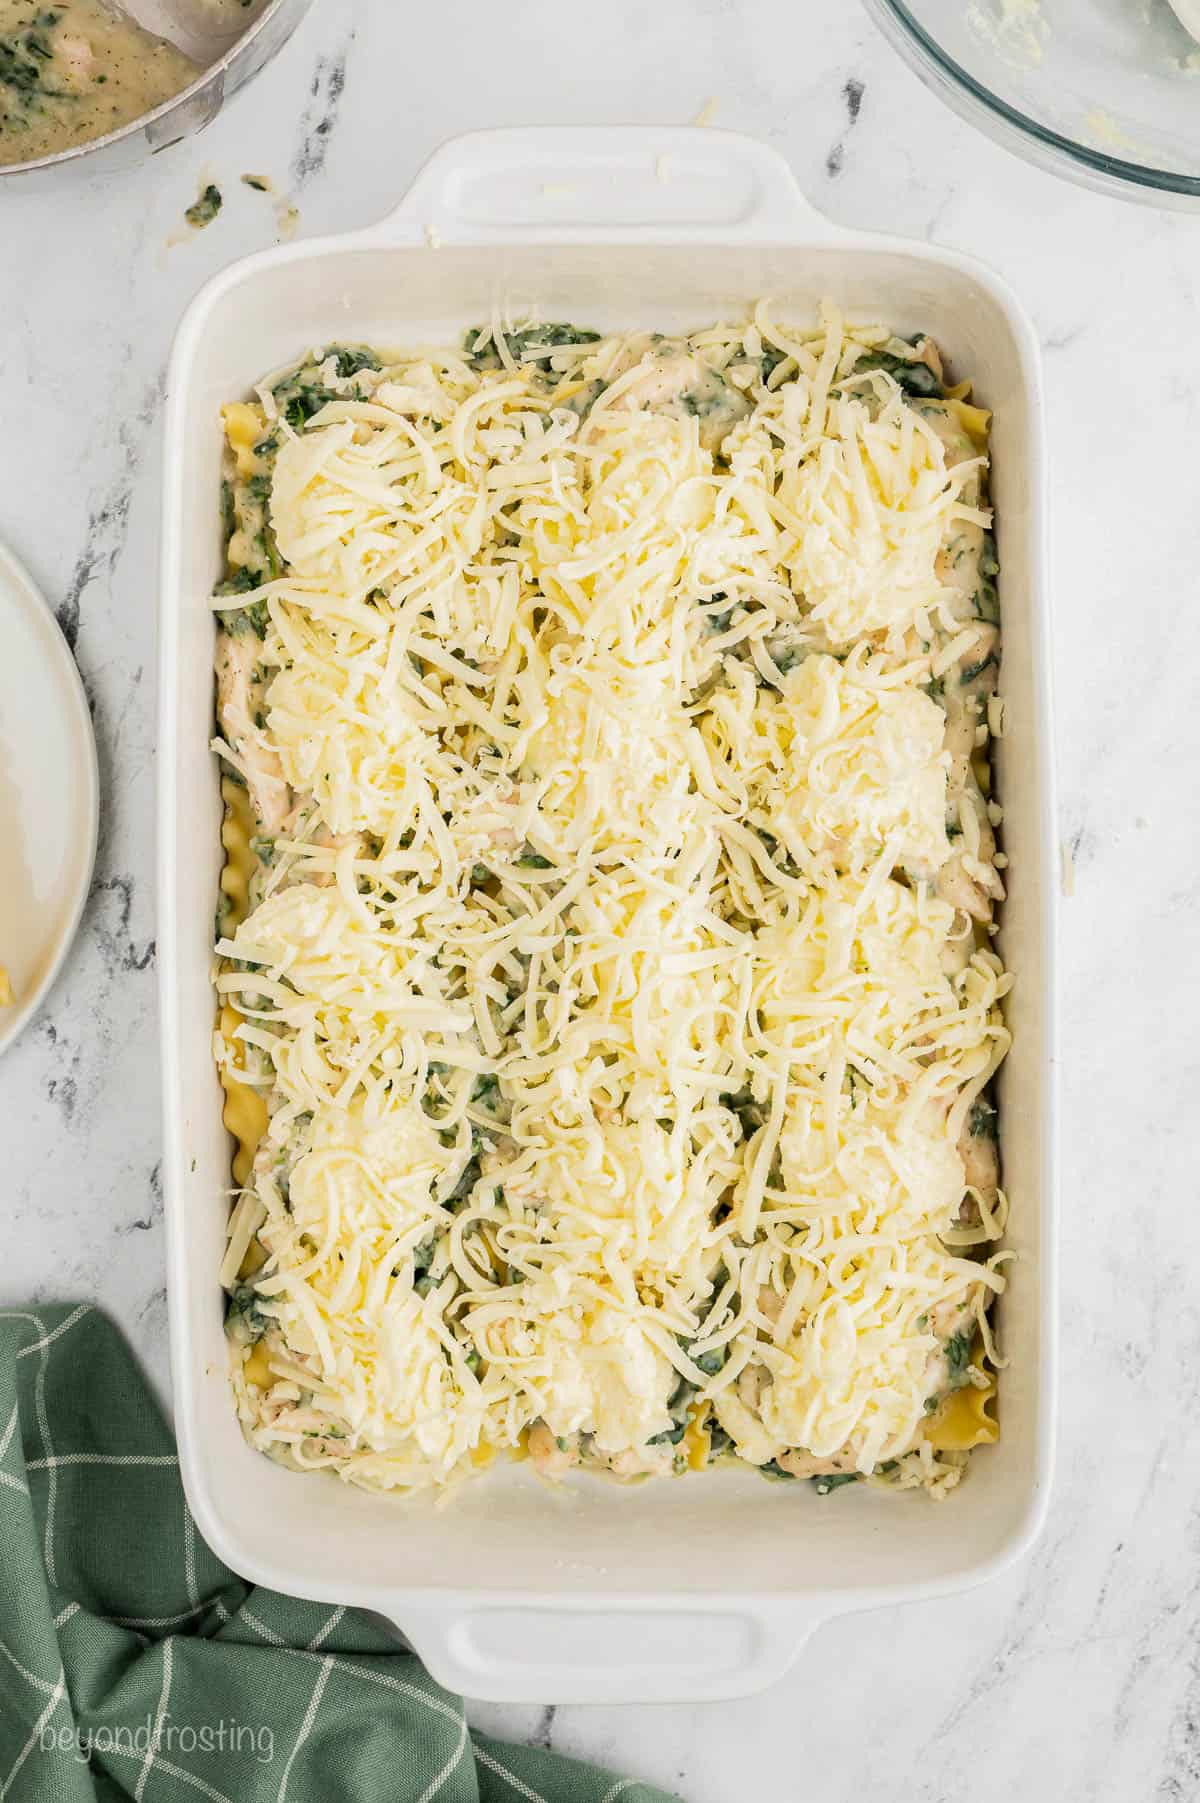 Cheese layered with noodles in a casserole dish